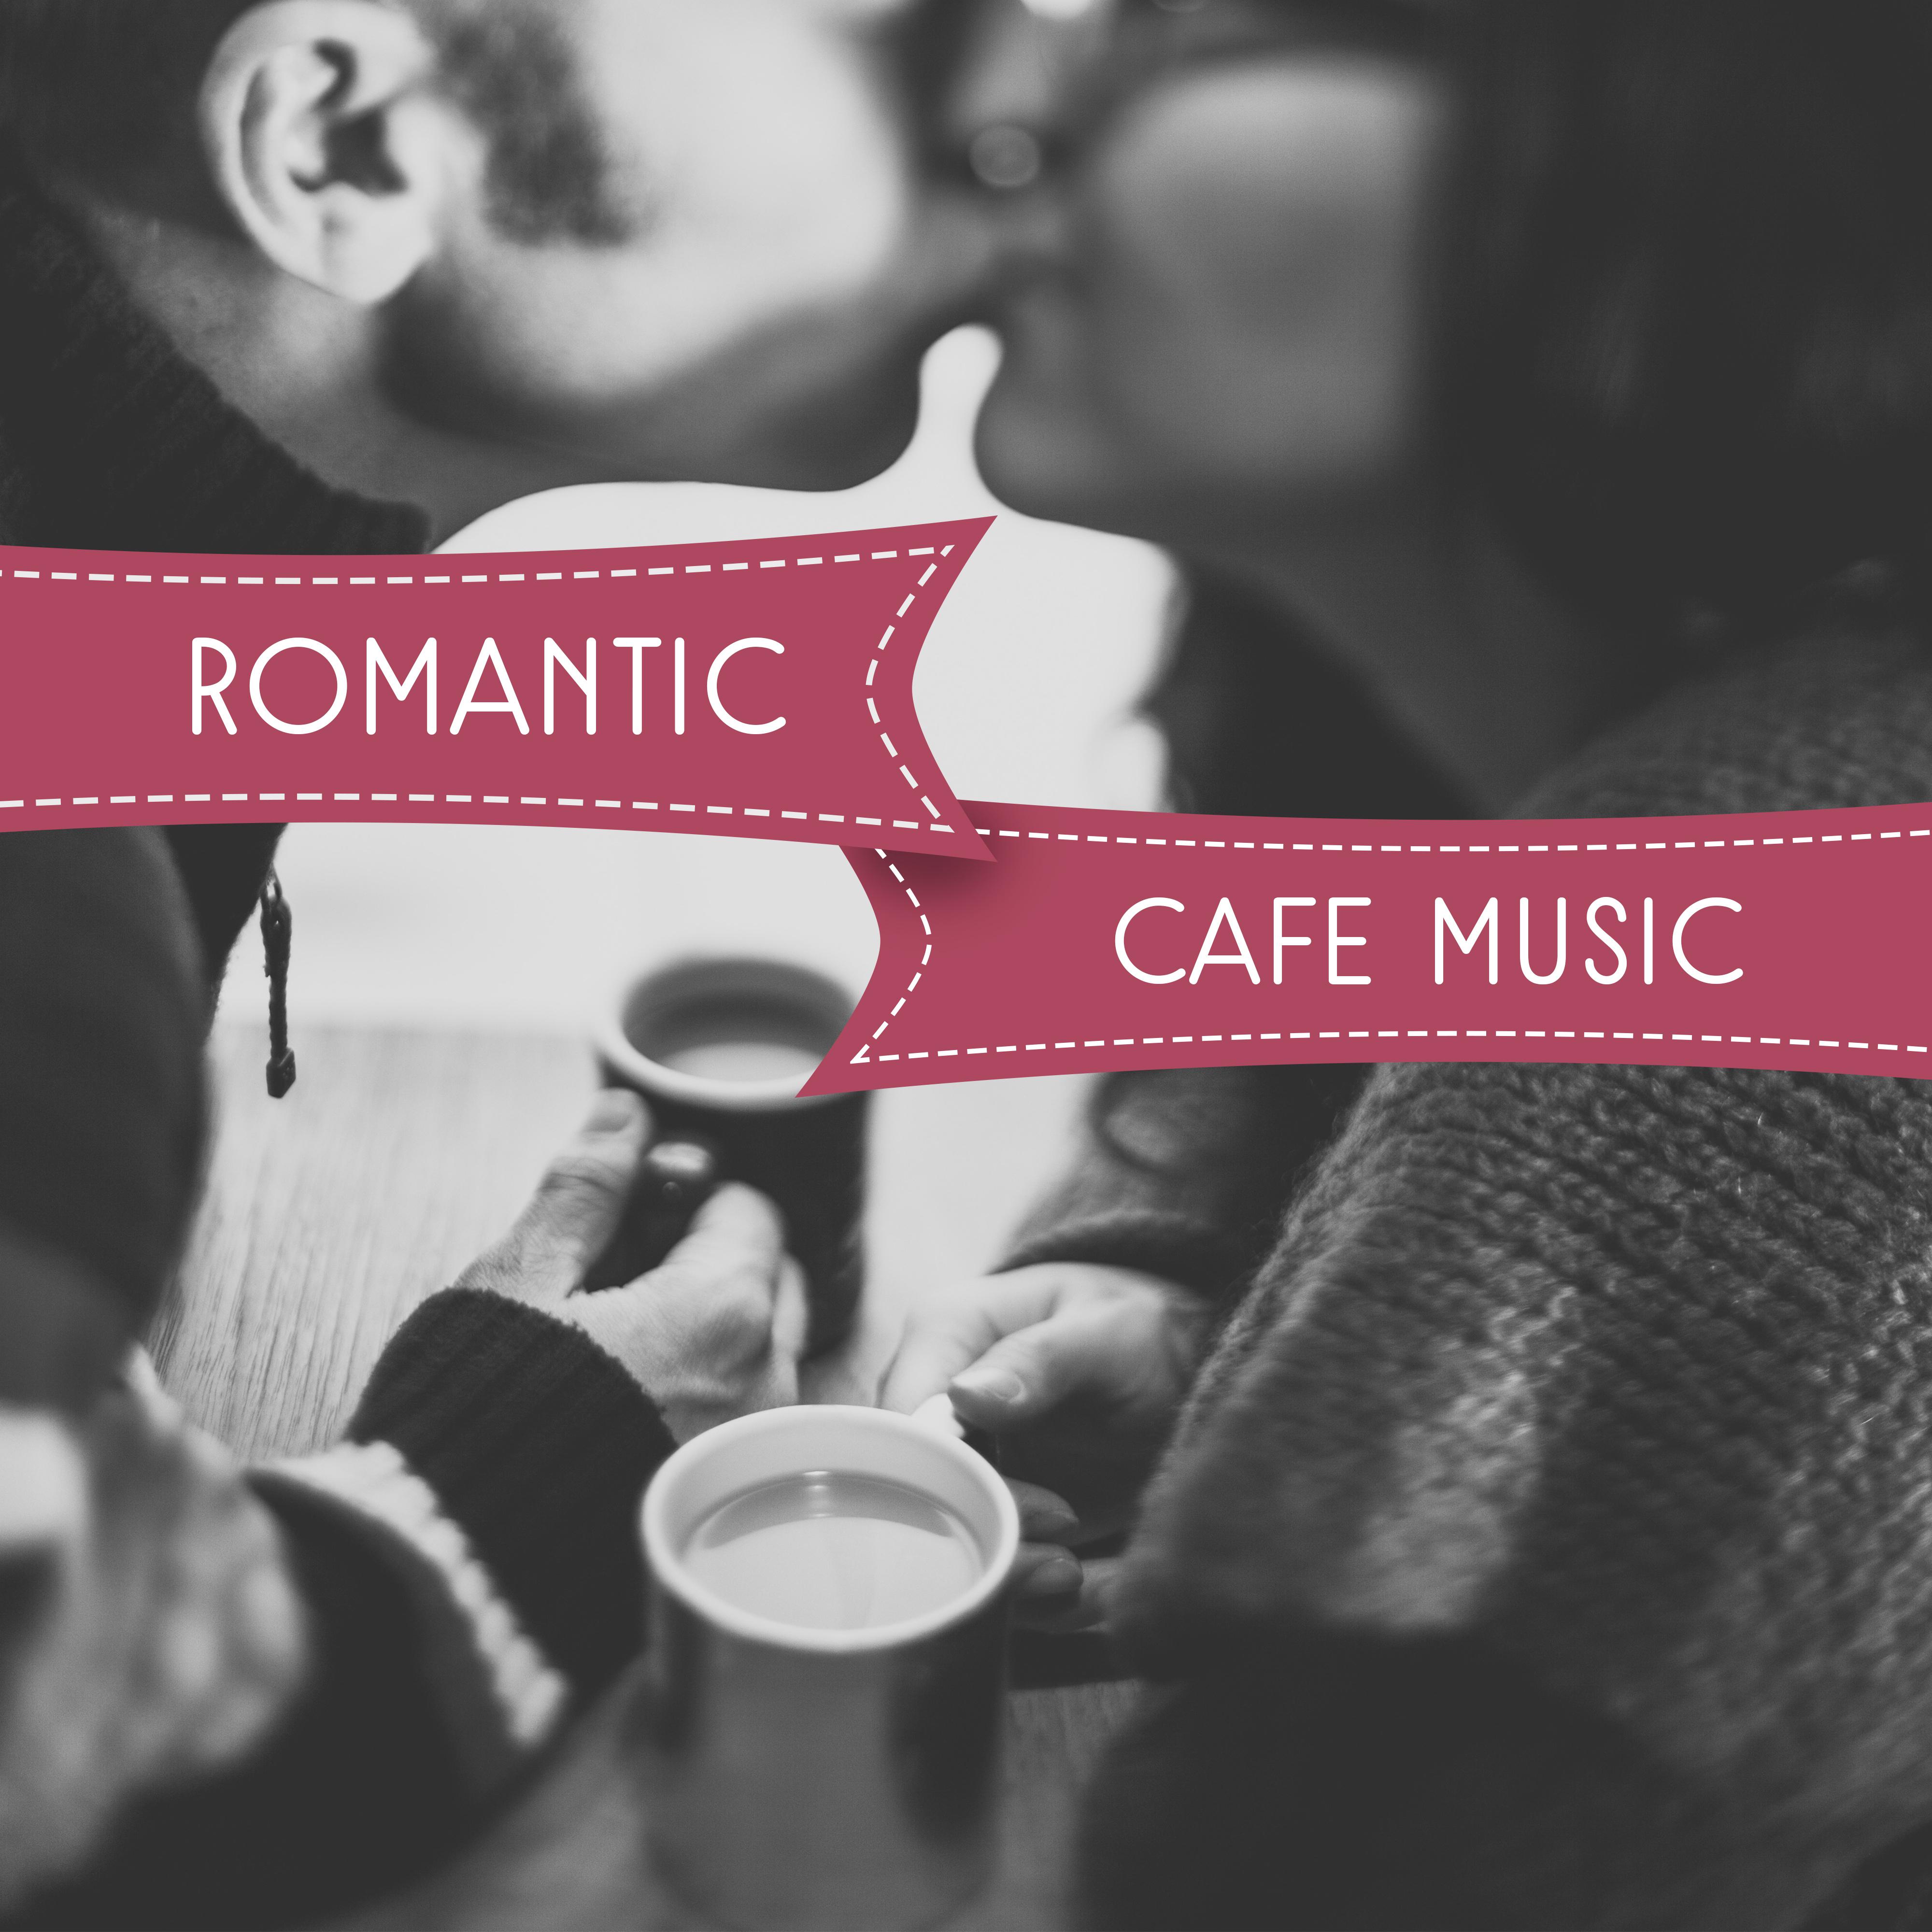 Romantic Cafe Music  Sensual Piano Sounds, Romantic Music, Jazz for Cafe, Easy Listening Music